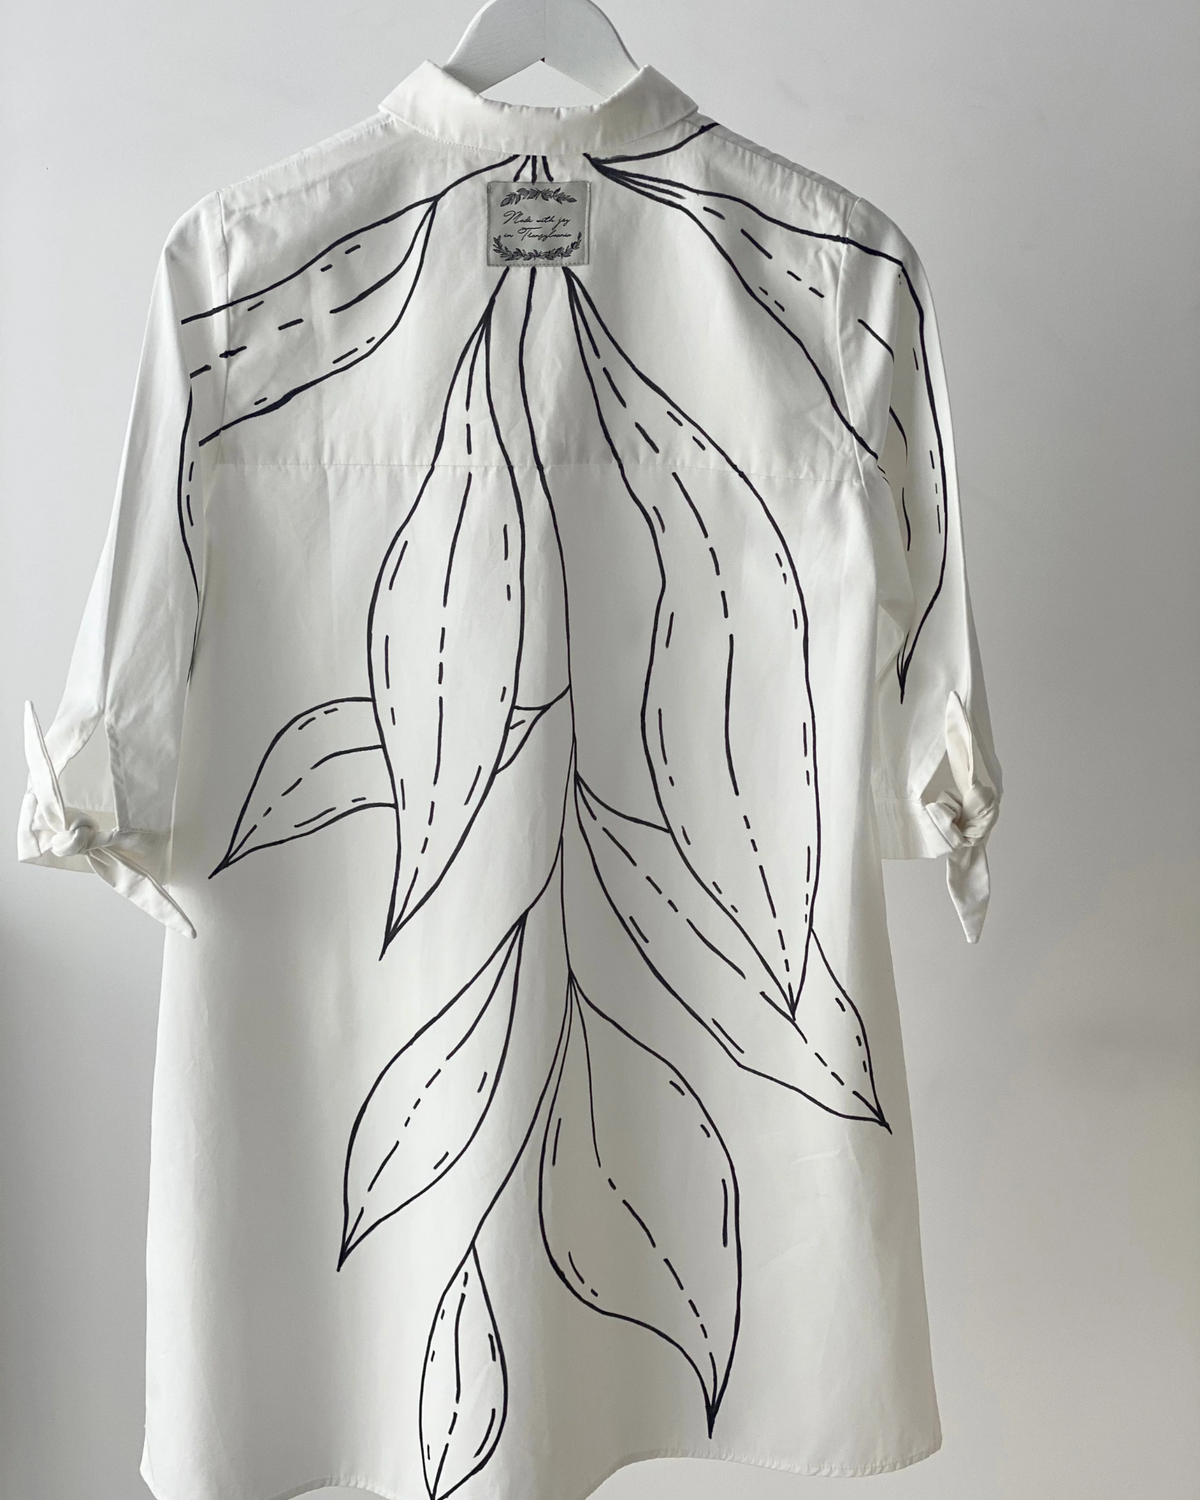 Painted dress as a unique gift Monochromatic Leaves